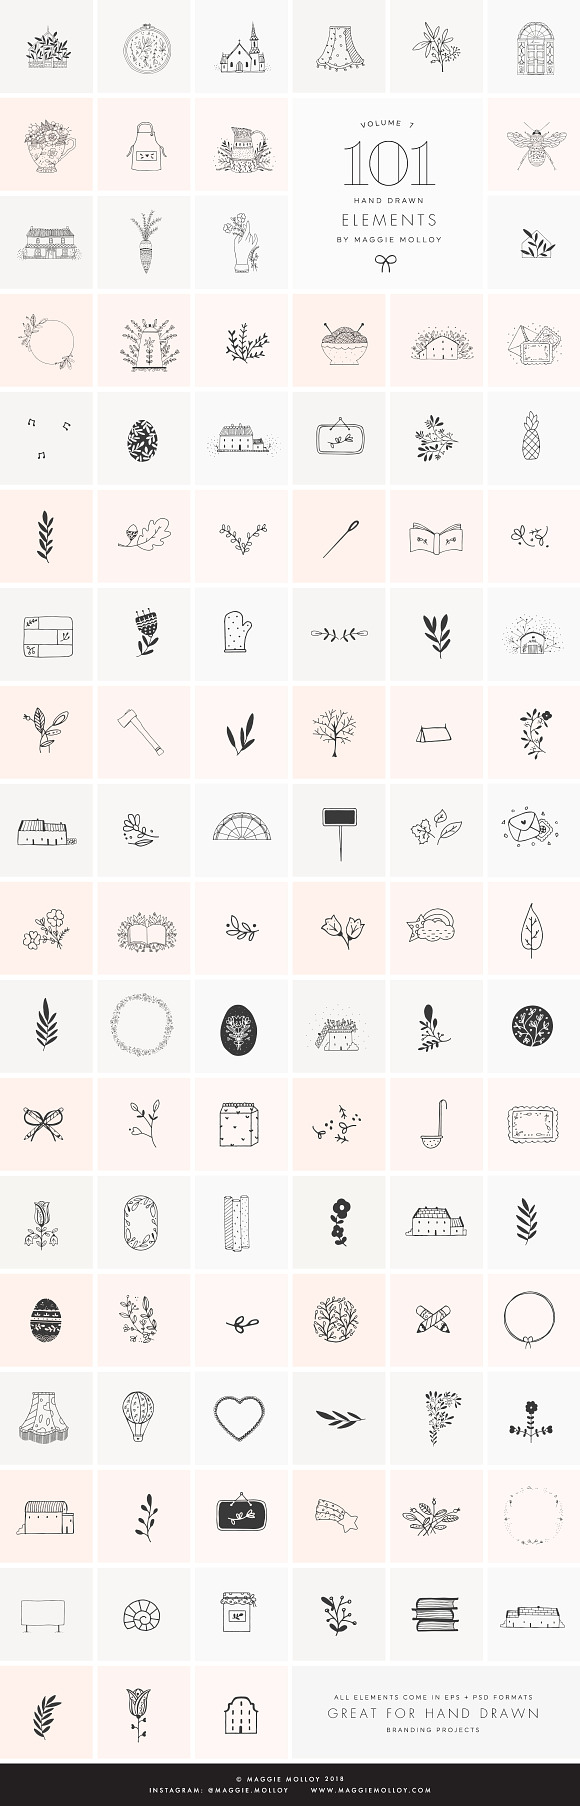 404 Hand Drawn Logo Elements Vol 5-8 in Illustrations - product preview 2